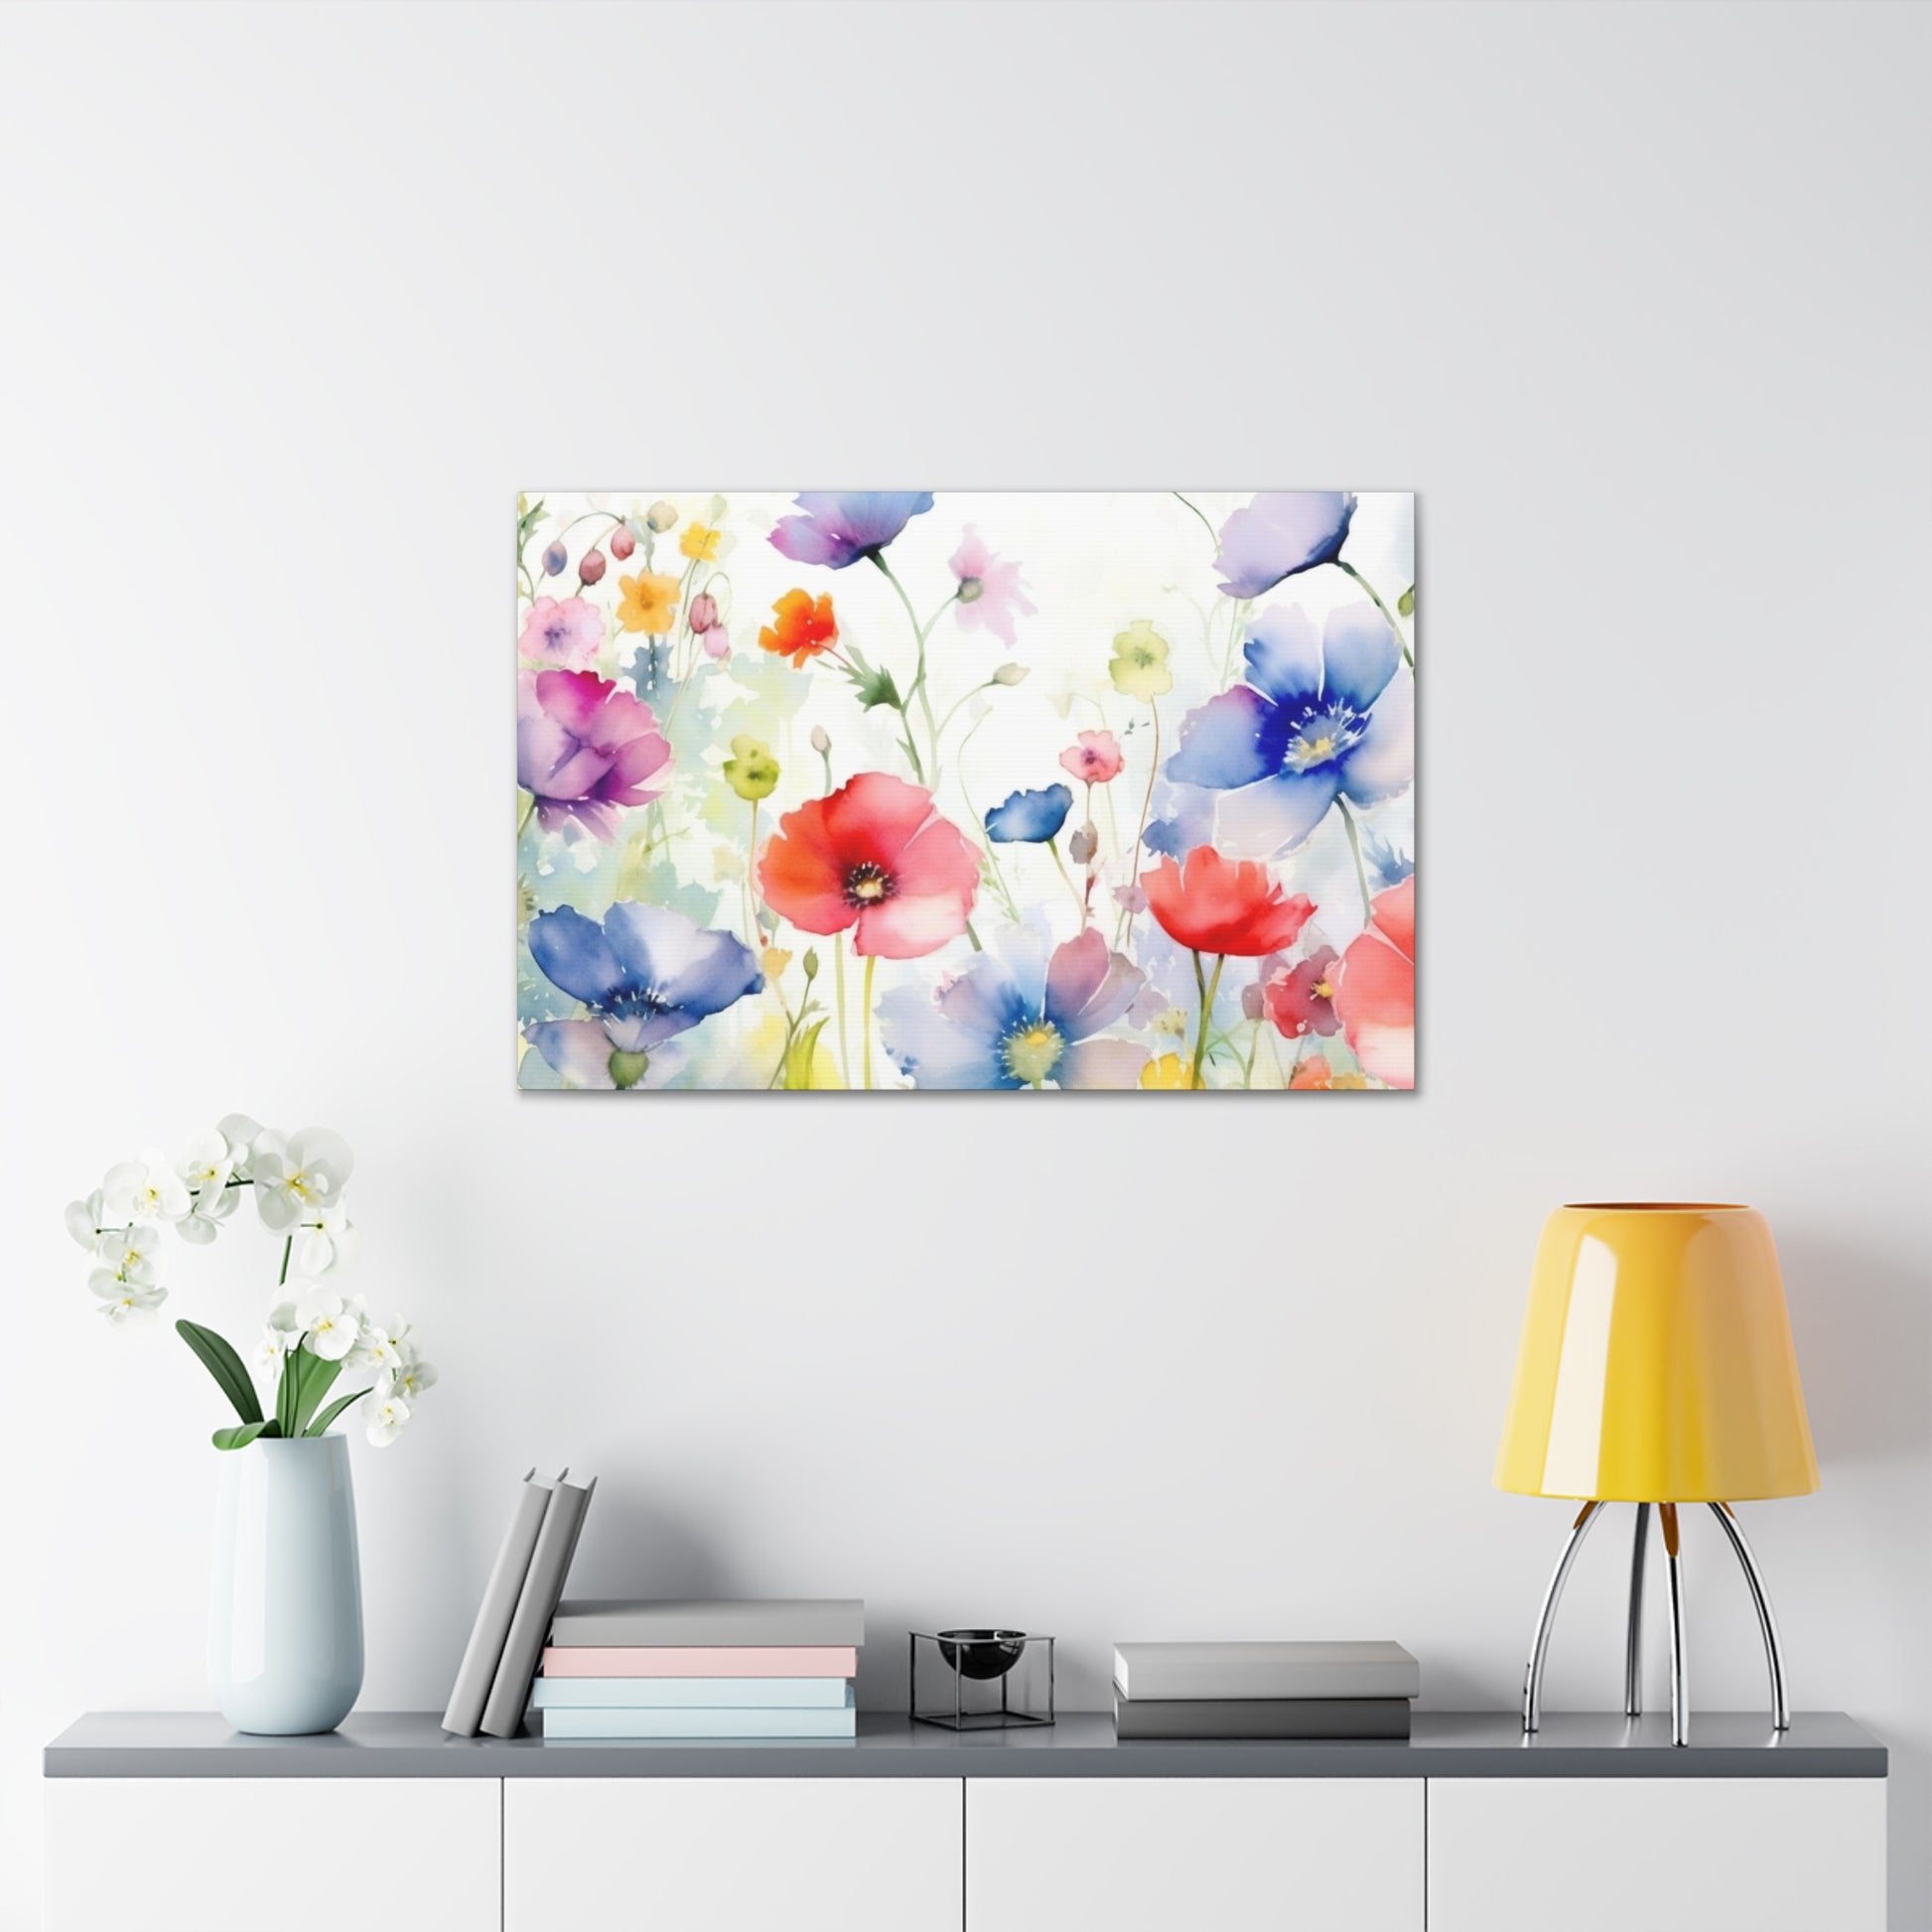 Wildflowers Canvas Gallery Wrap, Watercolor Floral Wall Art Print Decor Small Large Hanging Modern Landscape Living Room Starcove Fashion